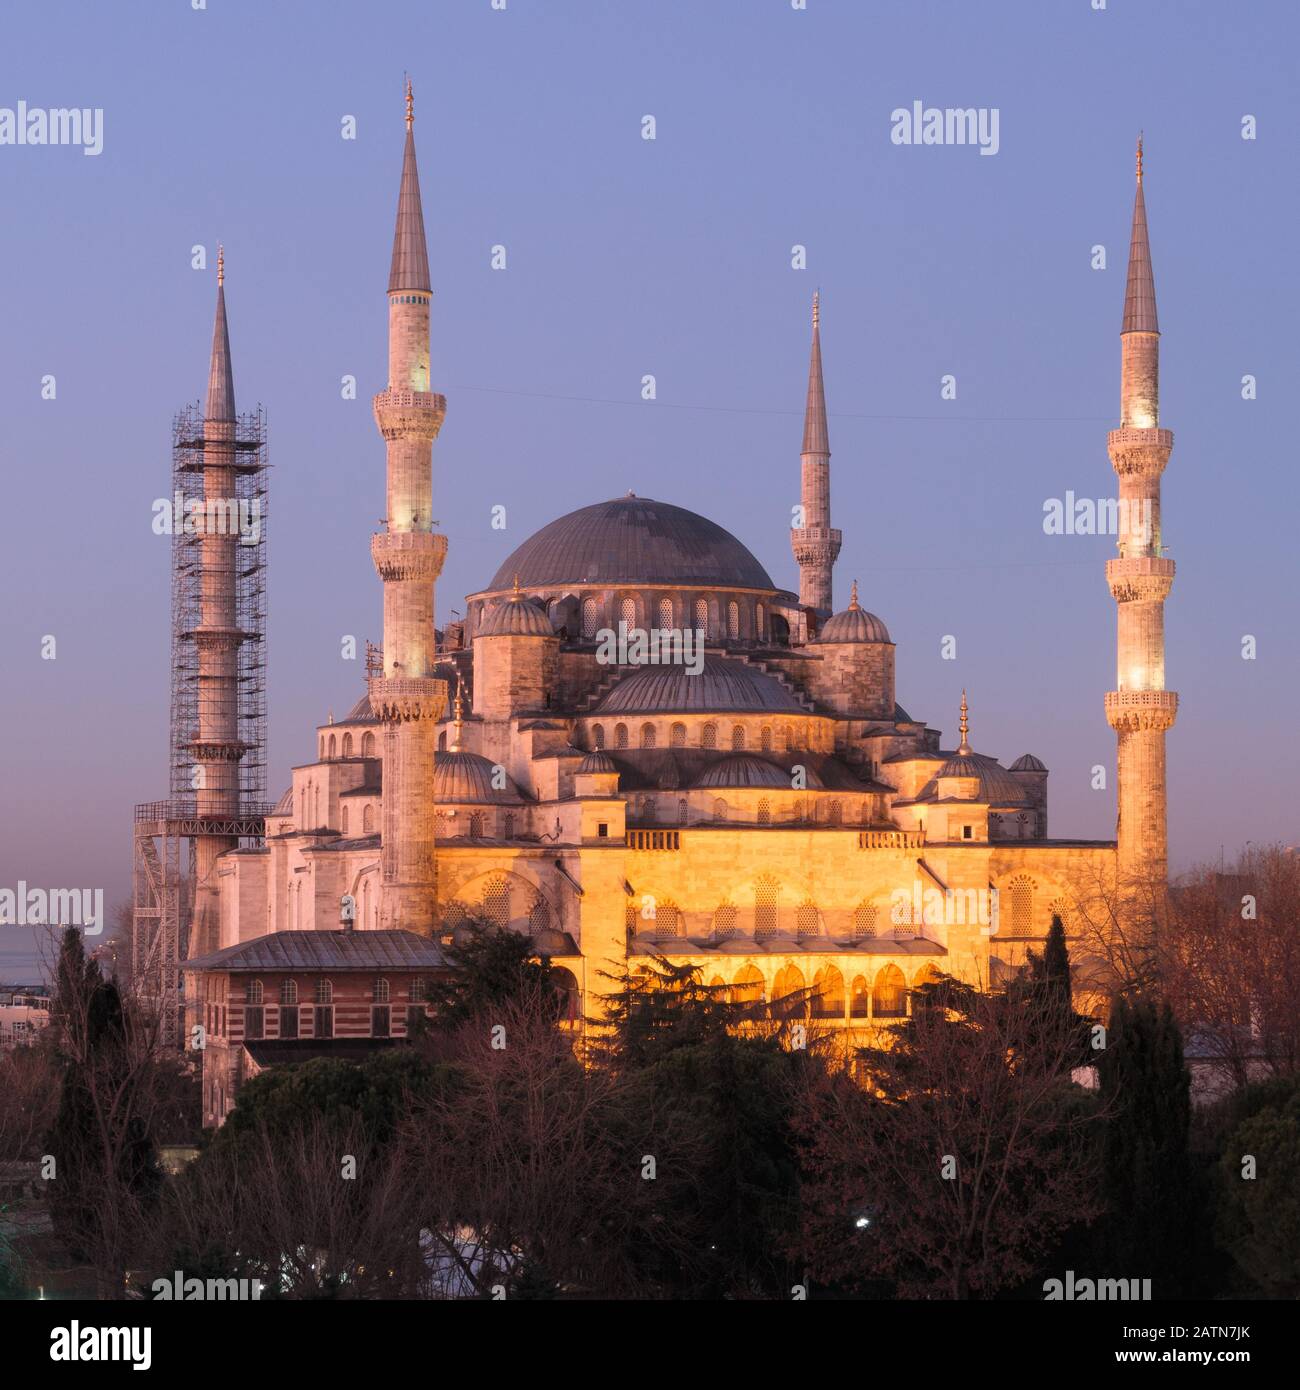 Istanbul, Turkey - Jan 11, 2020: Night top view over Sultan Ahmed Mosque or Blue Mosque, Sultanahmet, Istanbul, Turkey Stock Photo